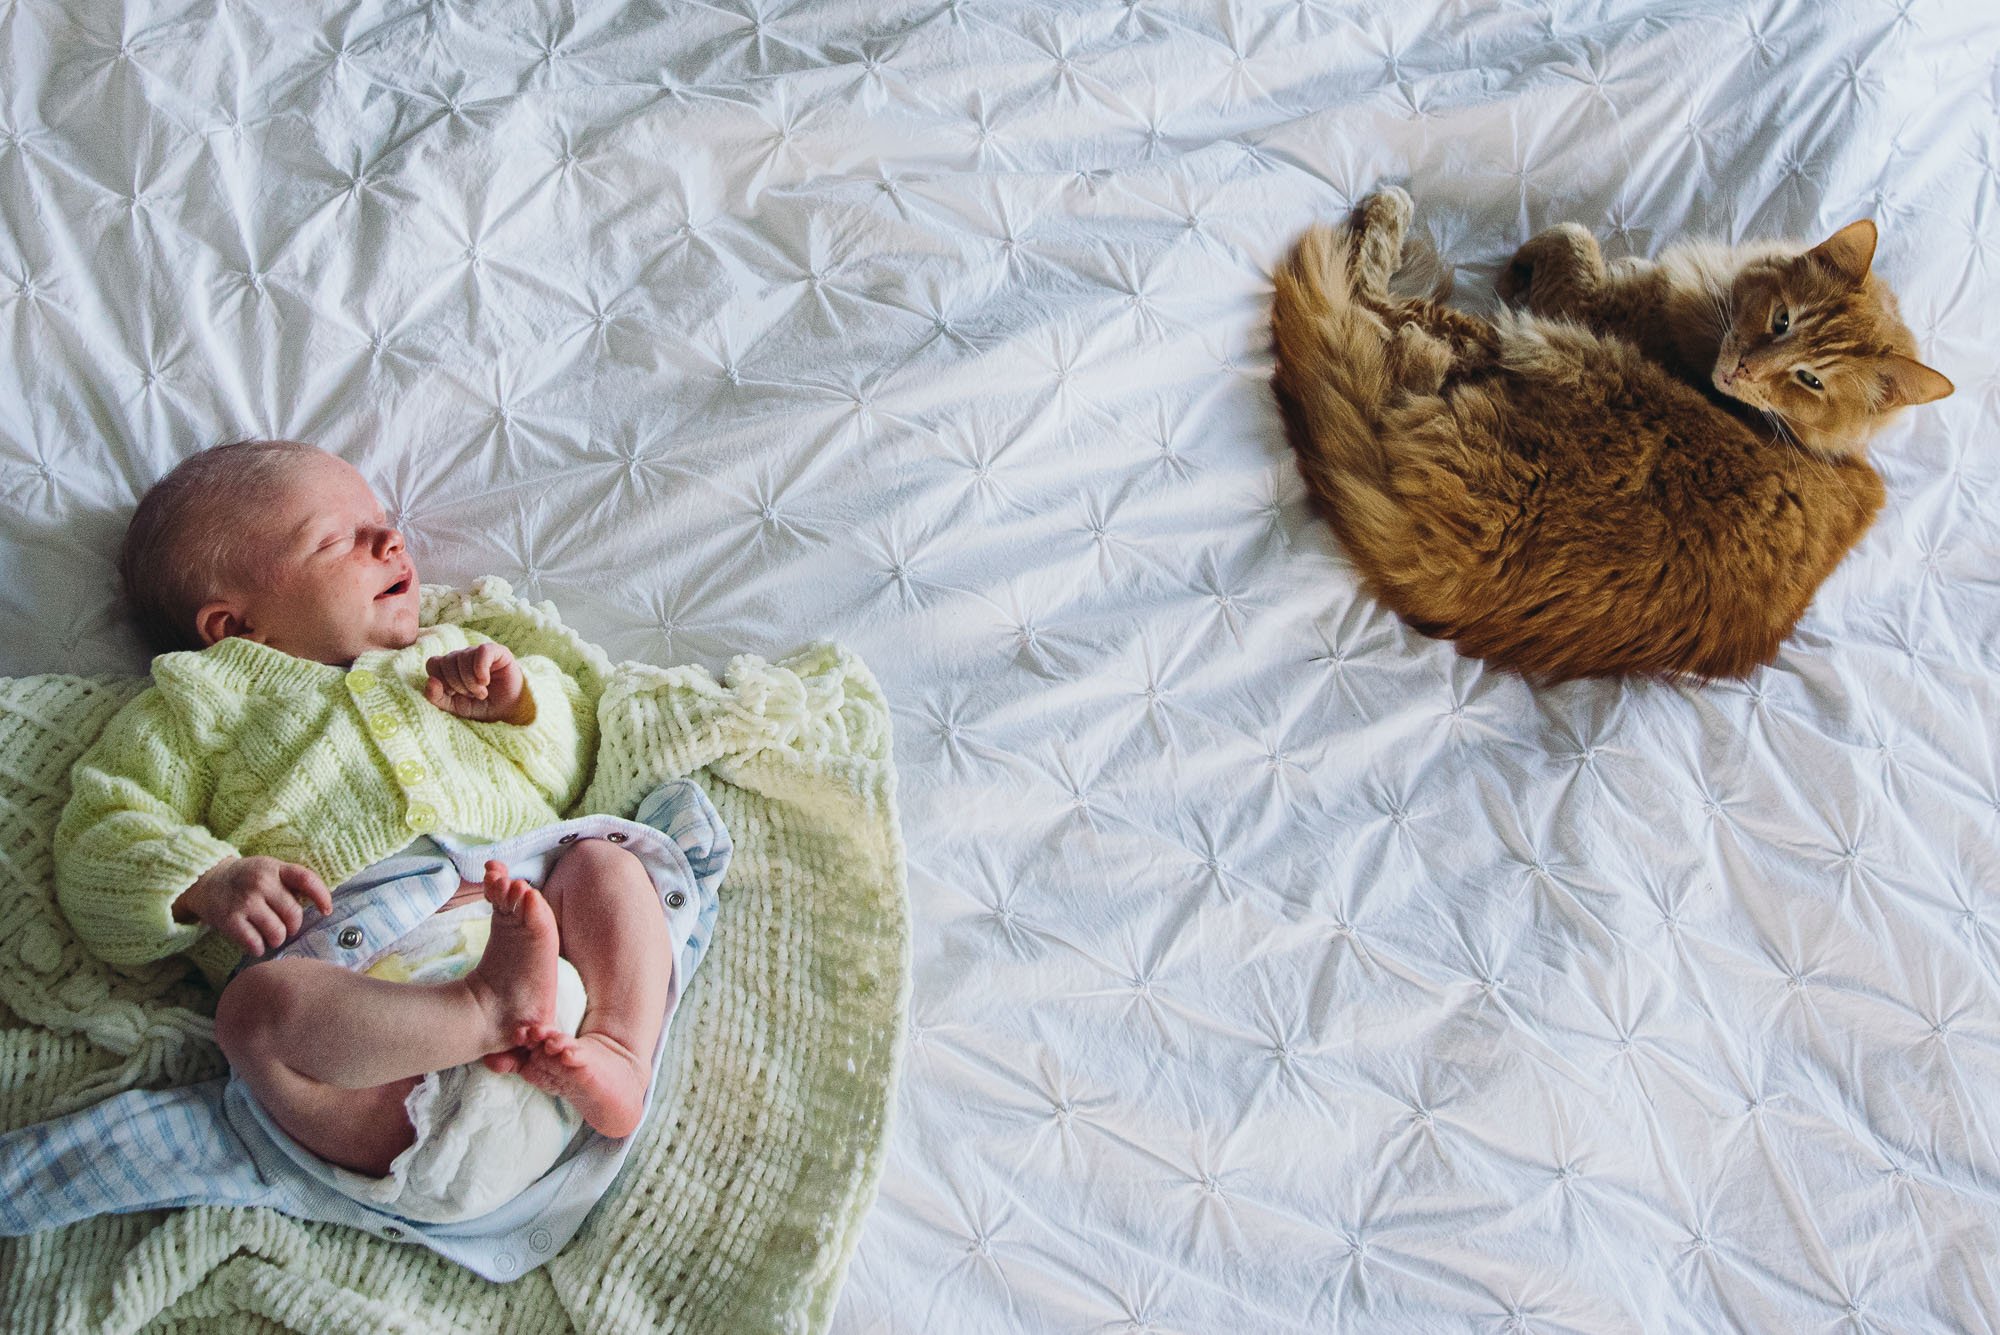 newborn-baby-boy-and-cat-on-bed-at-home-newborn-documentary-photography-sussex-brighton-worthing-hove-lewes.jpg